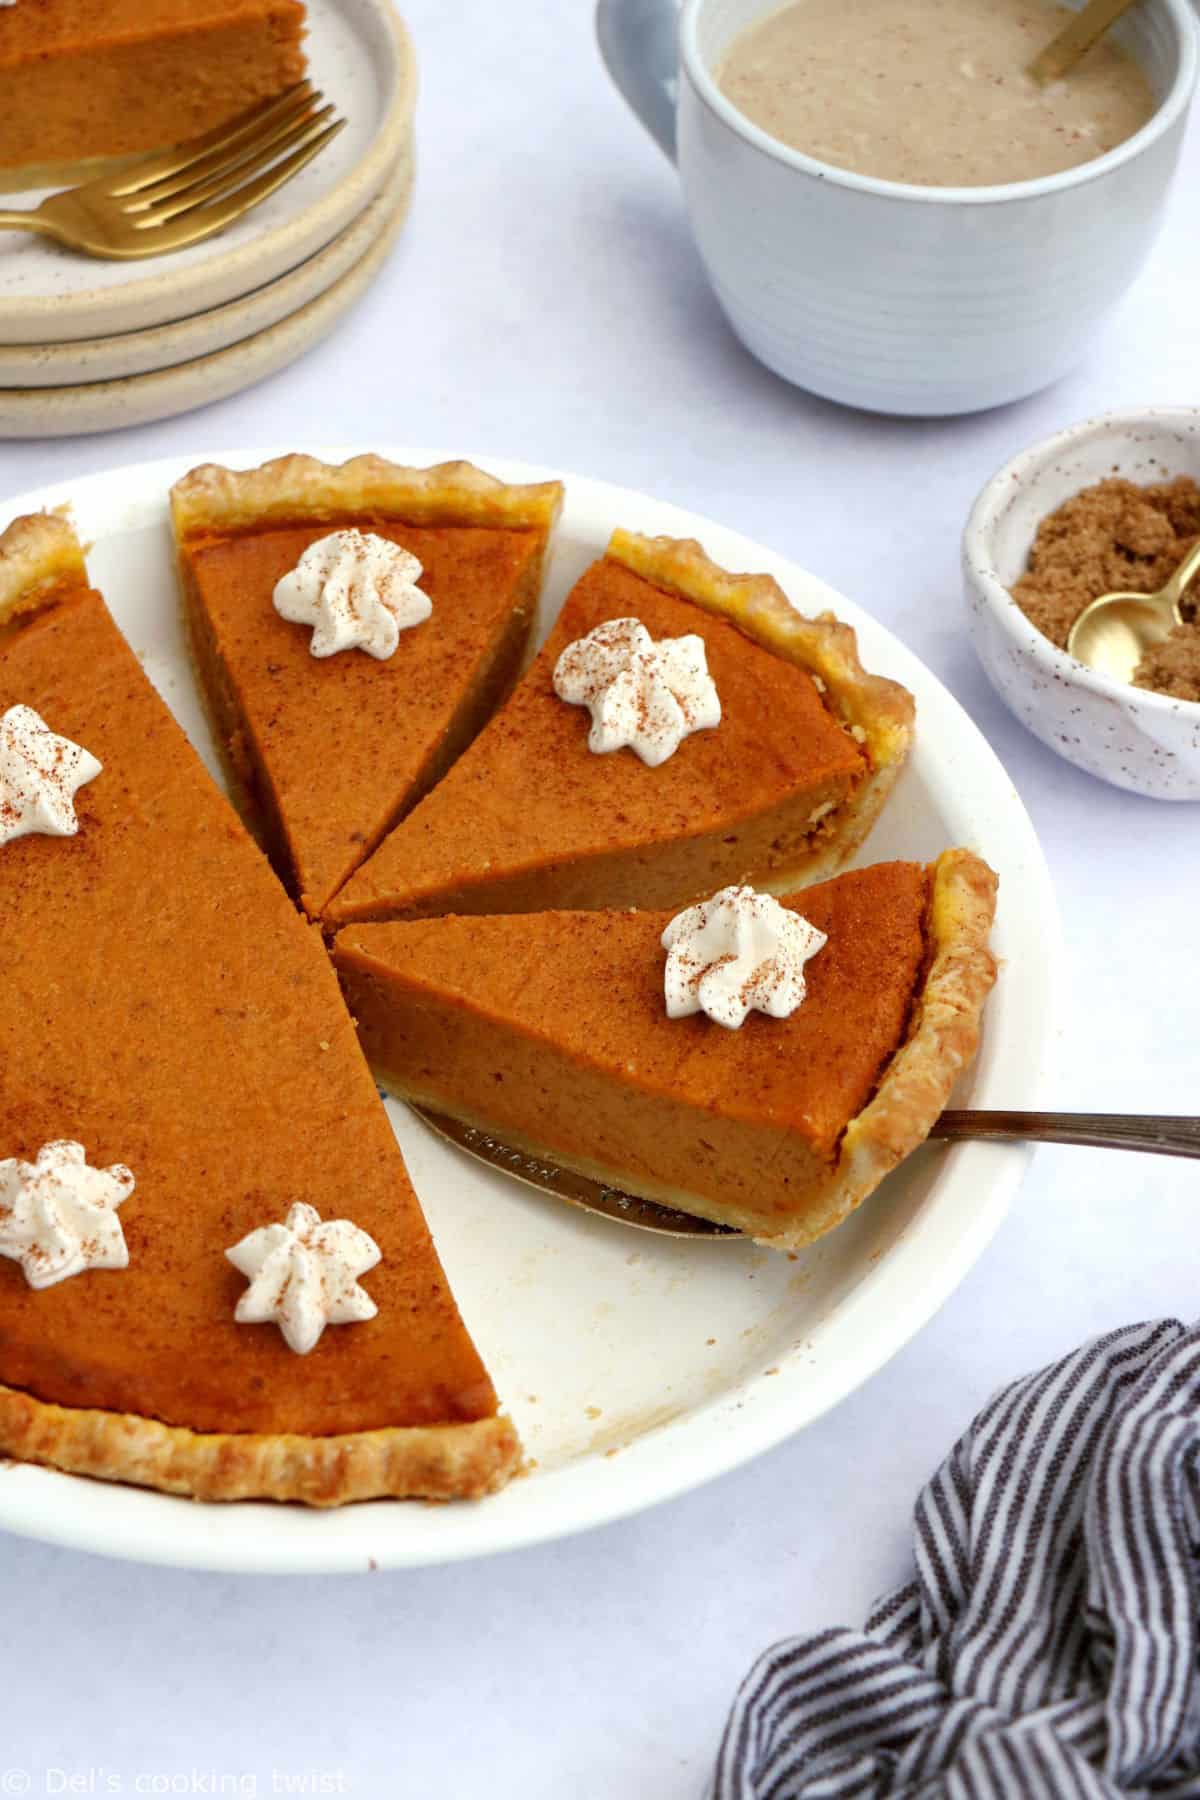 The old fashioned sweet potato pie is a classic dessert to enjoy during the fall months and a great alternative to pumpkin pie for Thanksgiving.